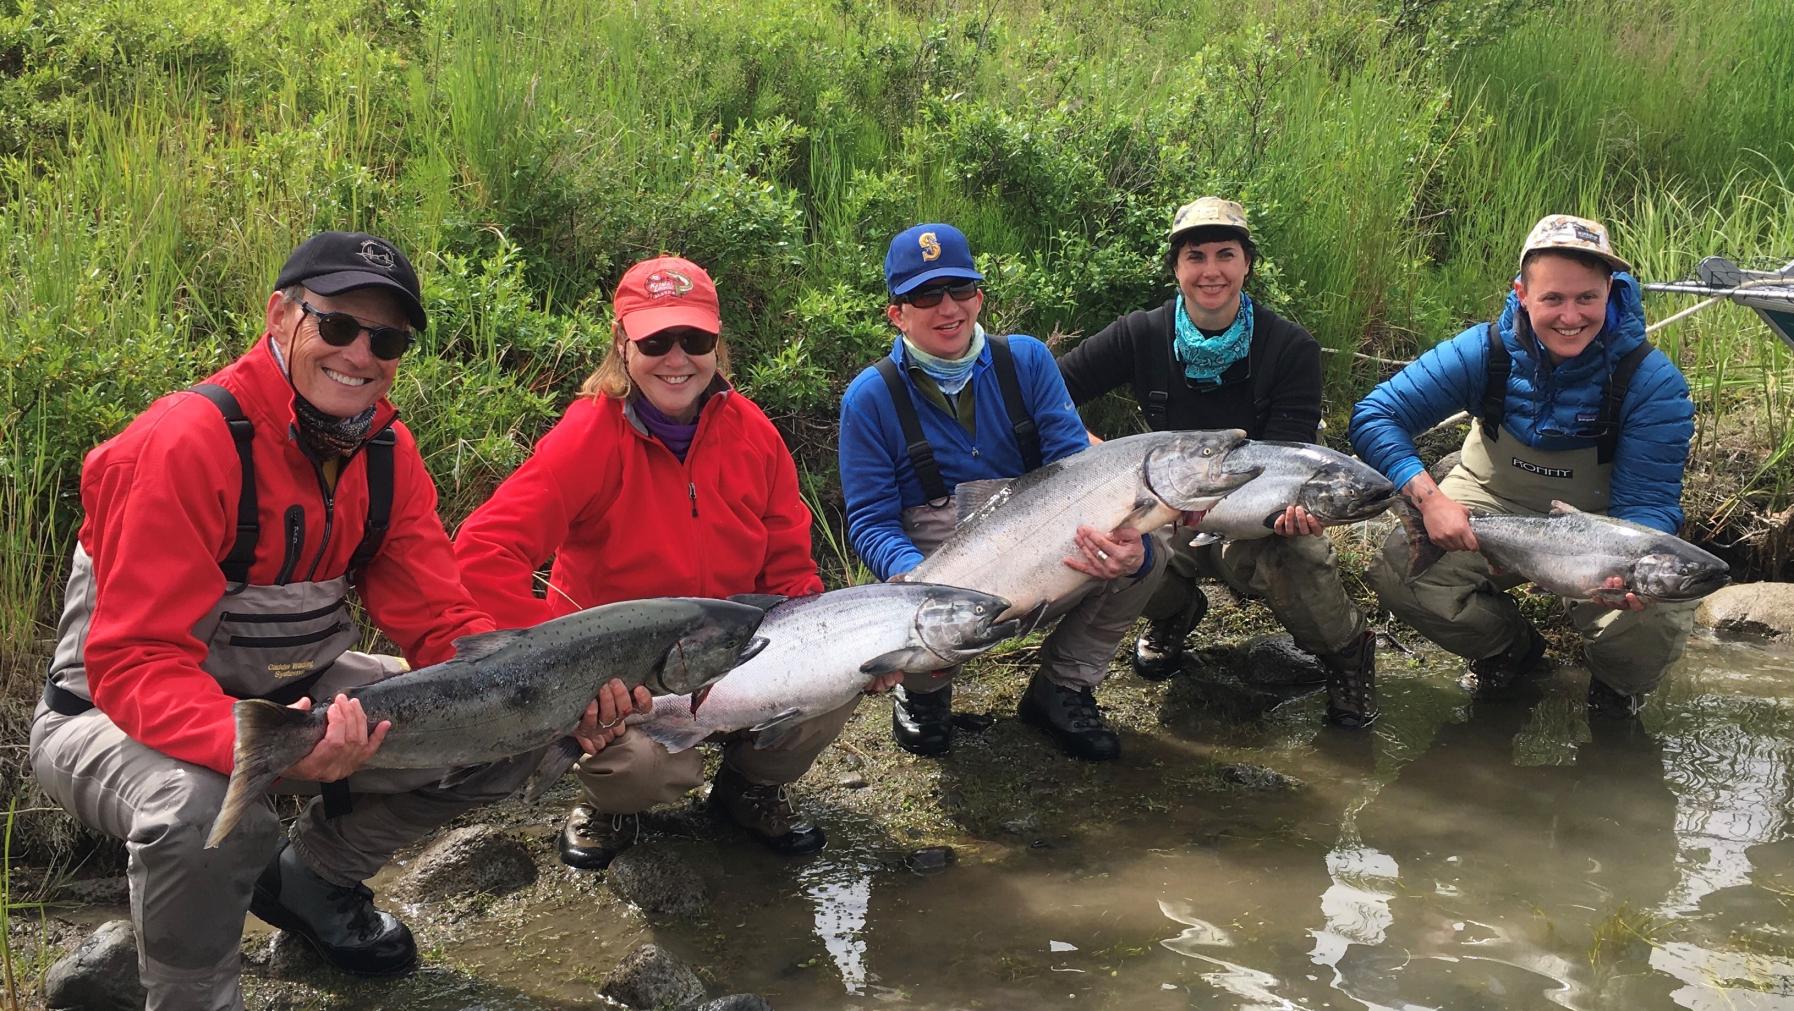 Members of the Leavitt family pose with their catch during a fishing trip to Alaska.